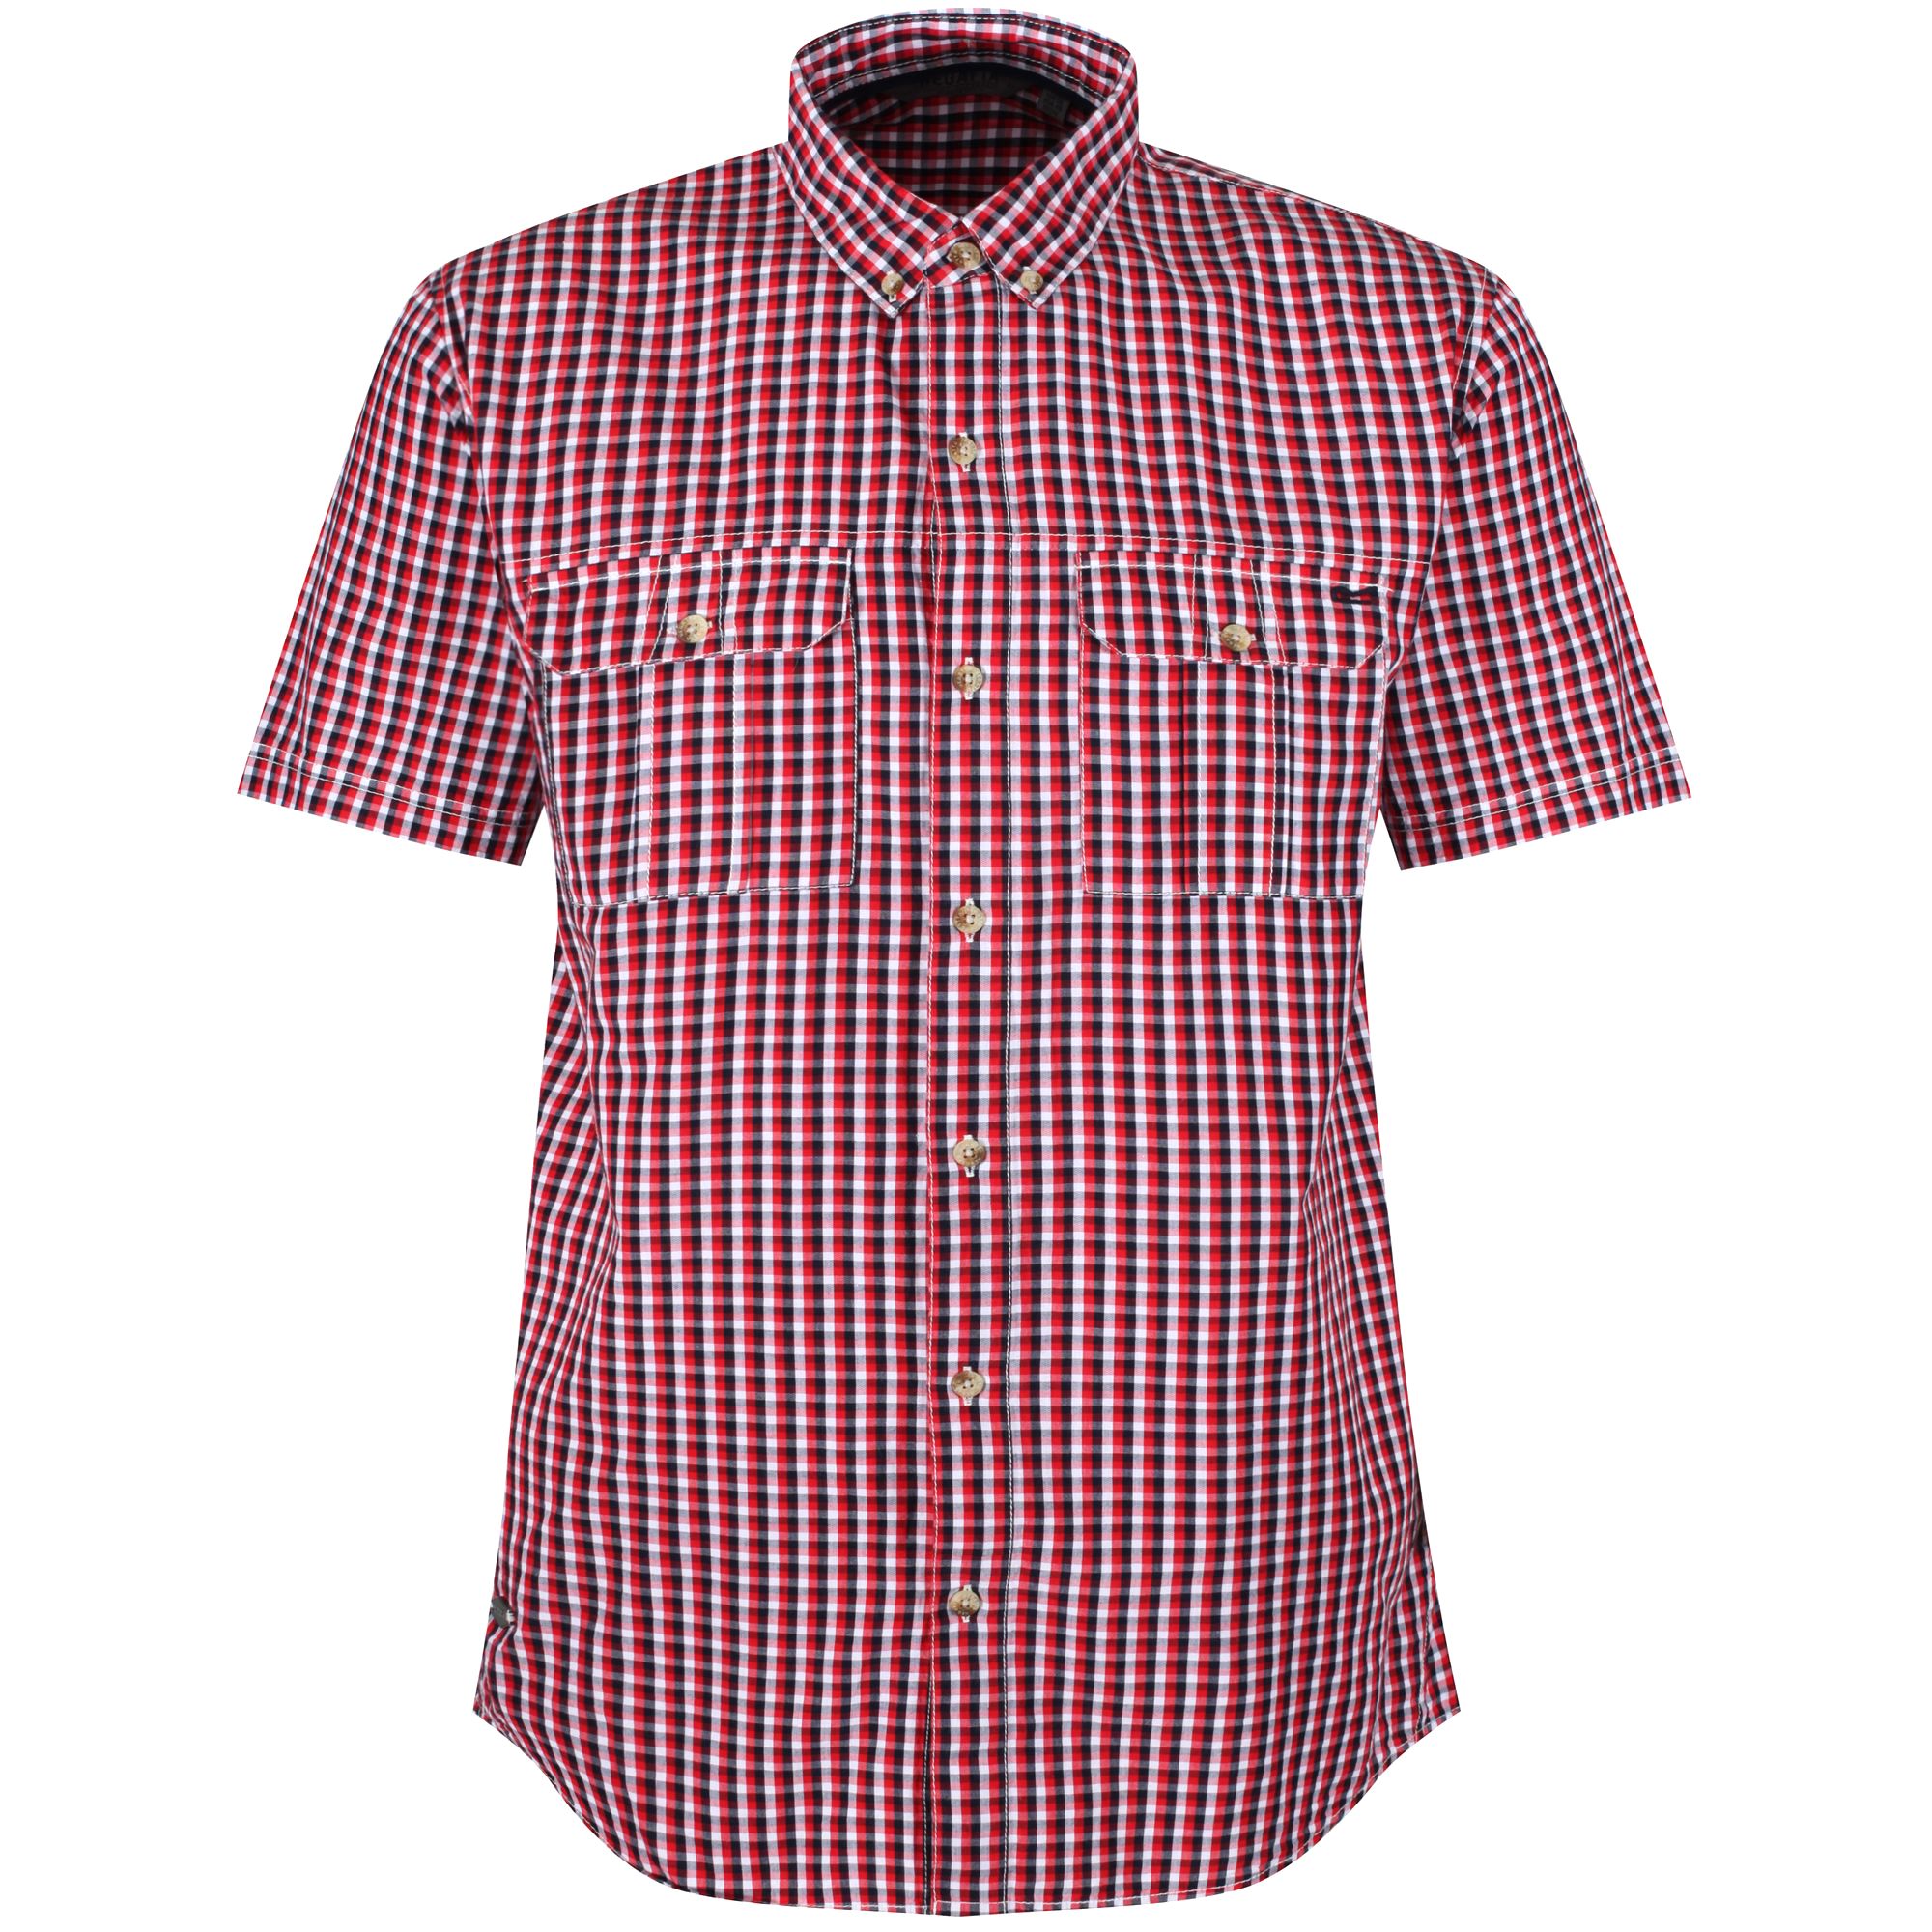 Mens shirt with button down collar and 2 chest pockets. 100% cool weave cotton. Machine washable.